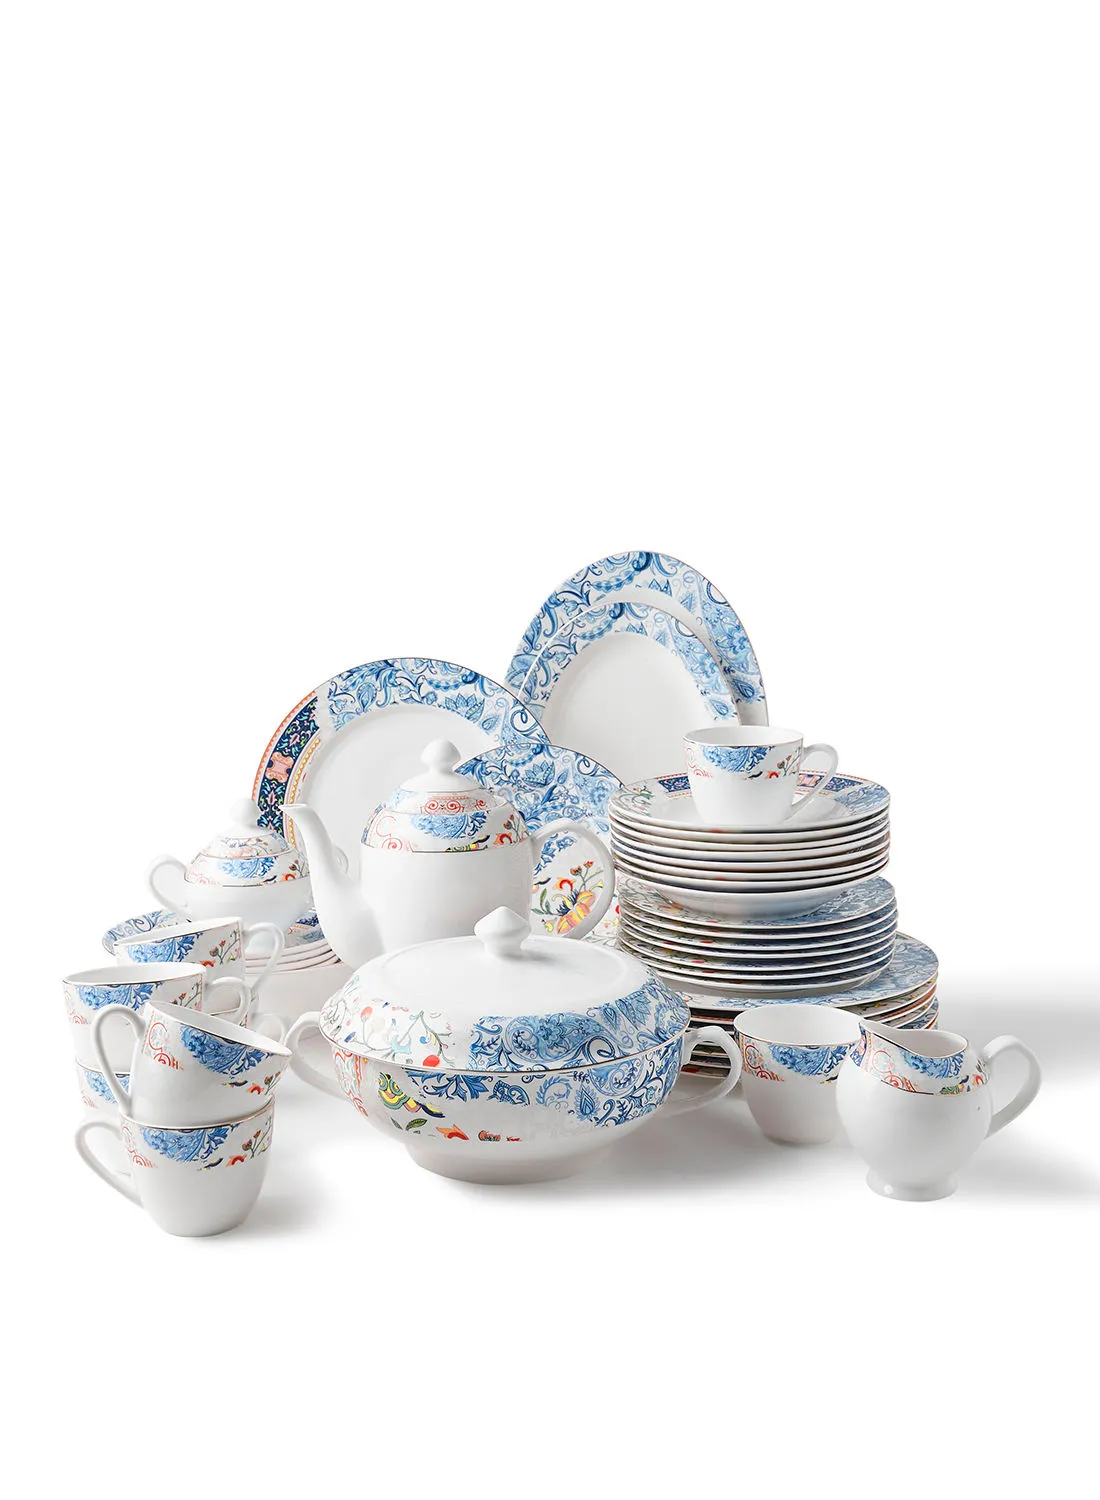 noon east 50 Piece Ceramic Dinner Set Premium Quality - Dishes, Plates - Dinner Plate, Side Plate, Bowl, Cups, Serving Dish And Bowl - Serves 8 - Festive Design Floral Dream